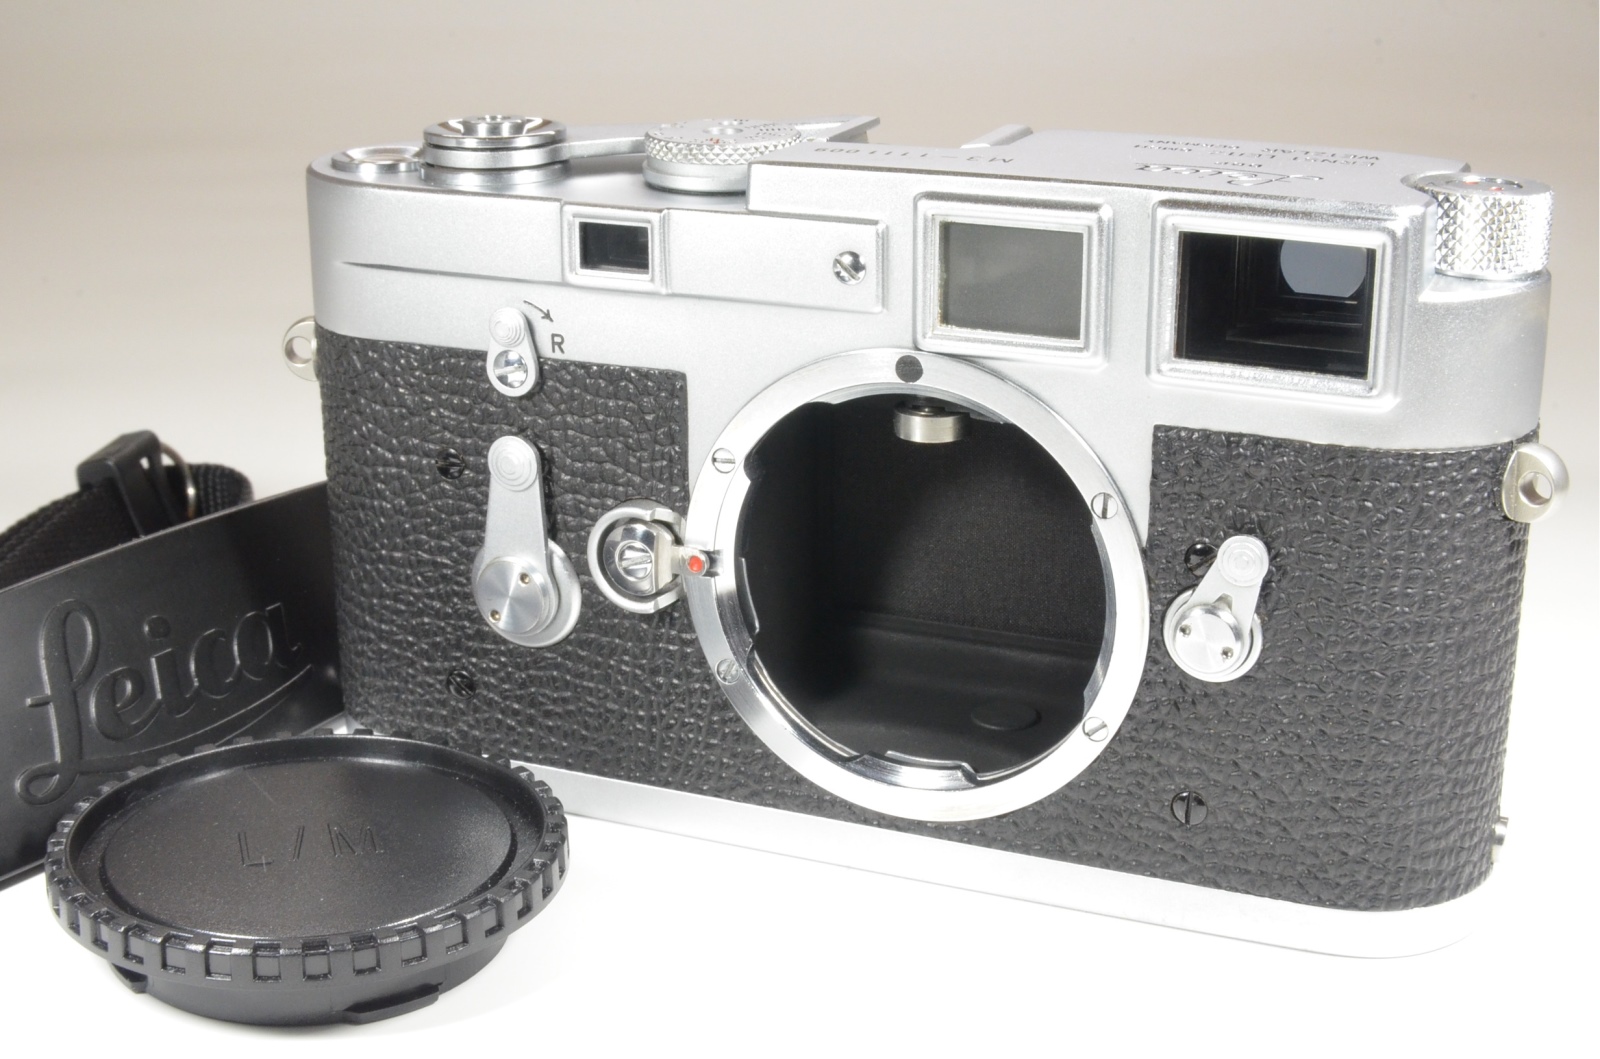 leica m3 single stroke s/n 1111009 year 1965 with strap